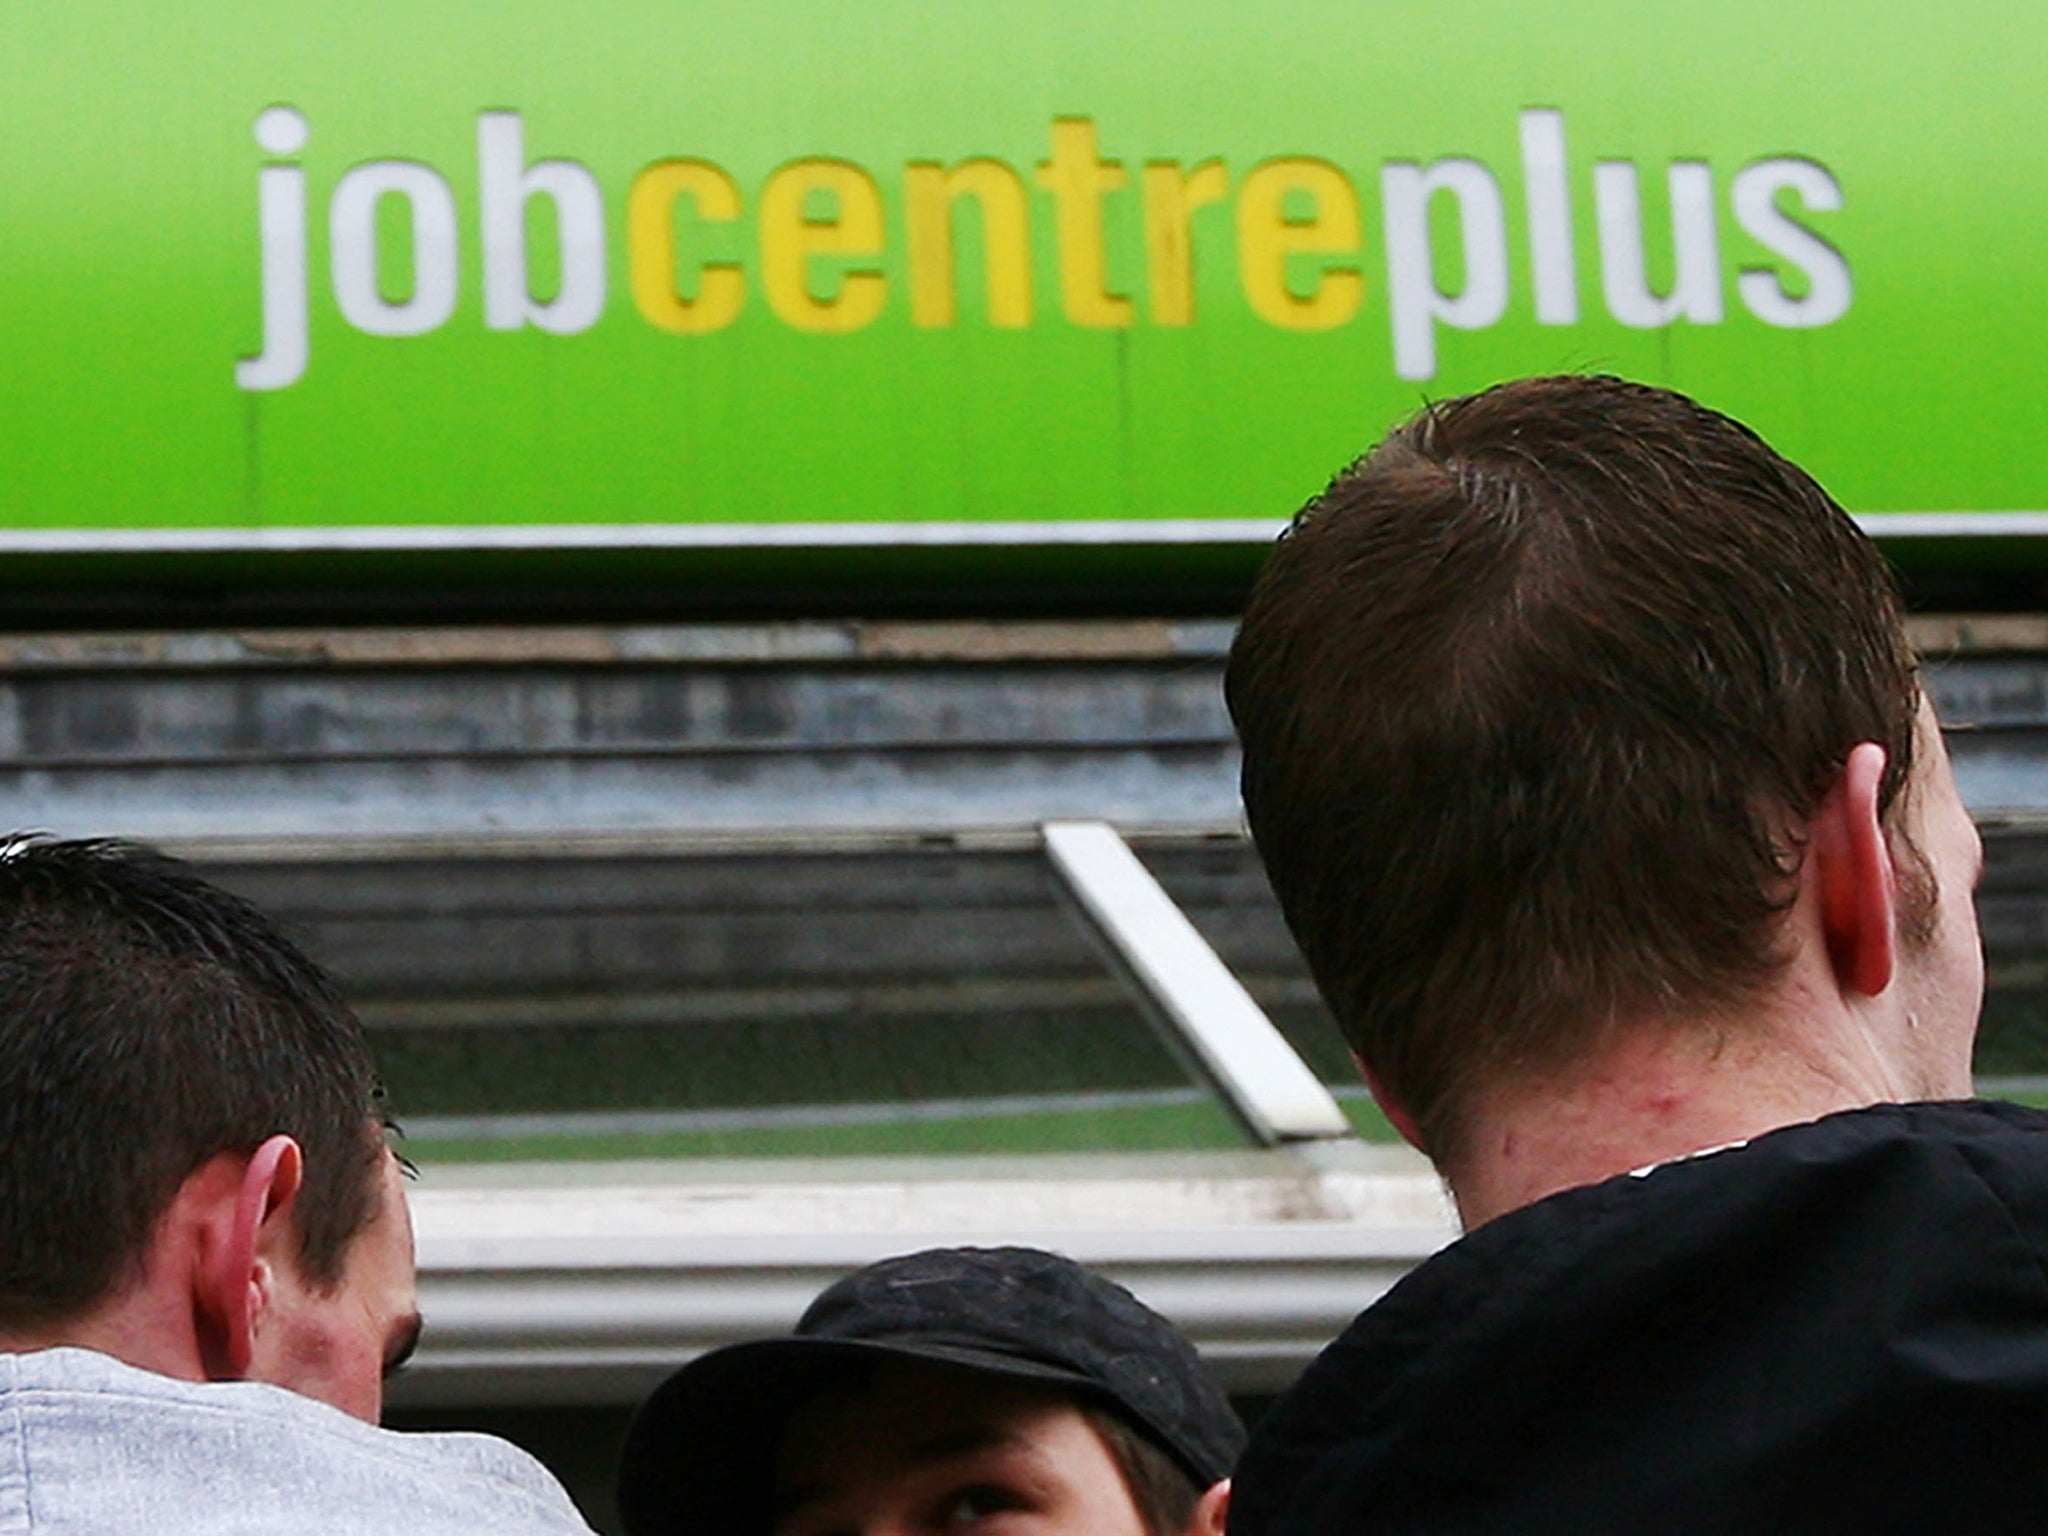 Unemployment decreased by 23,000 to 1.3 million in the three months to September